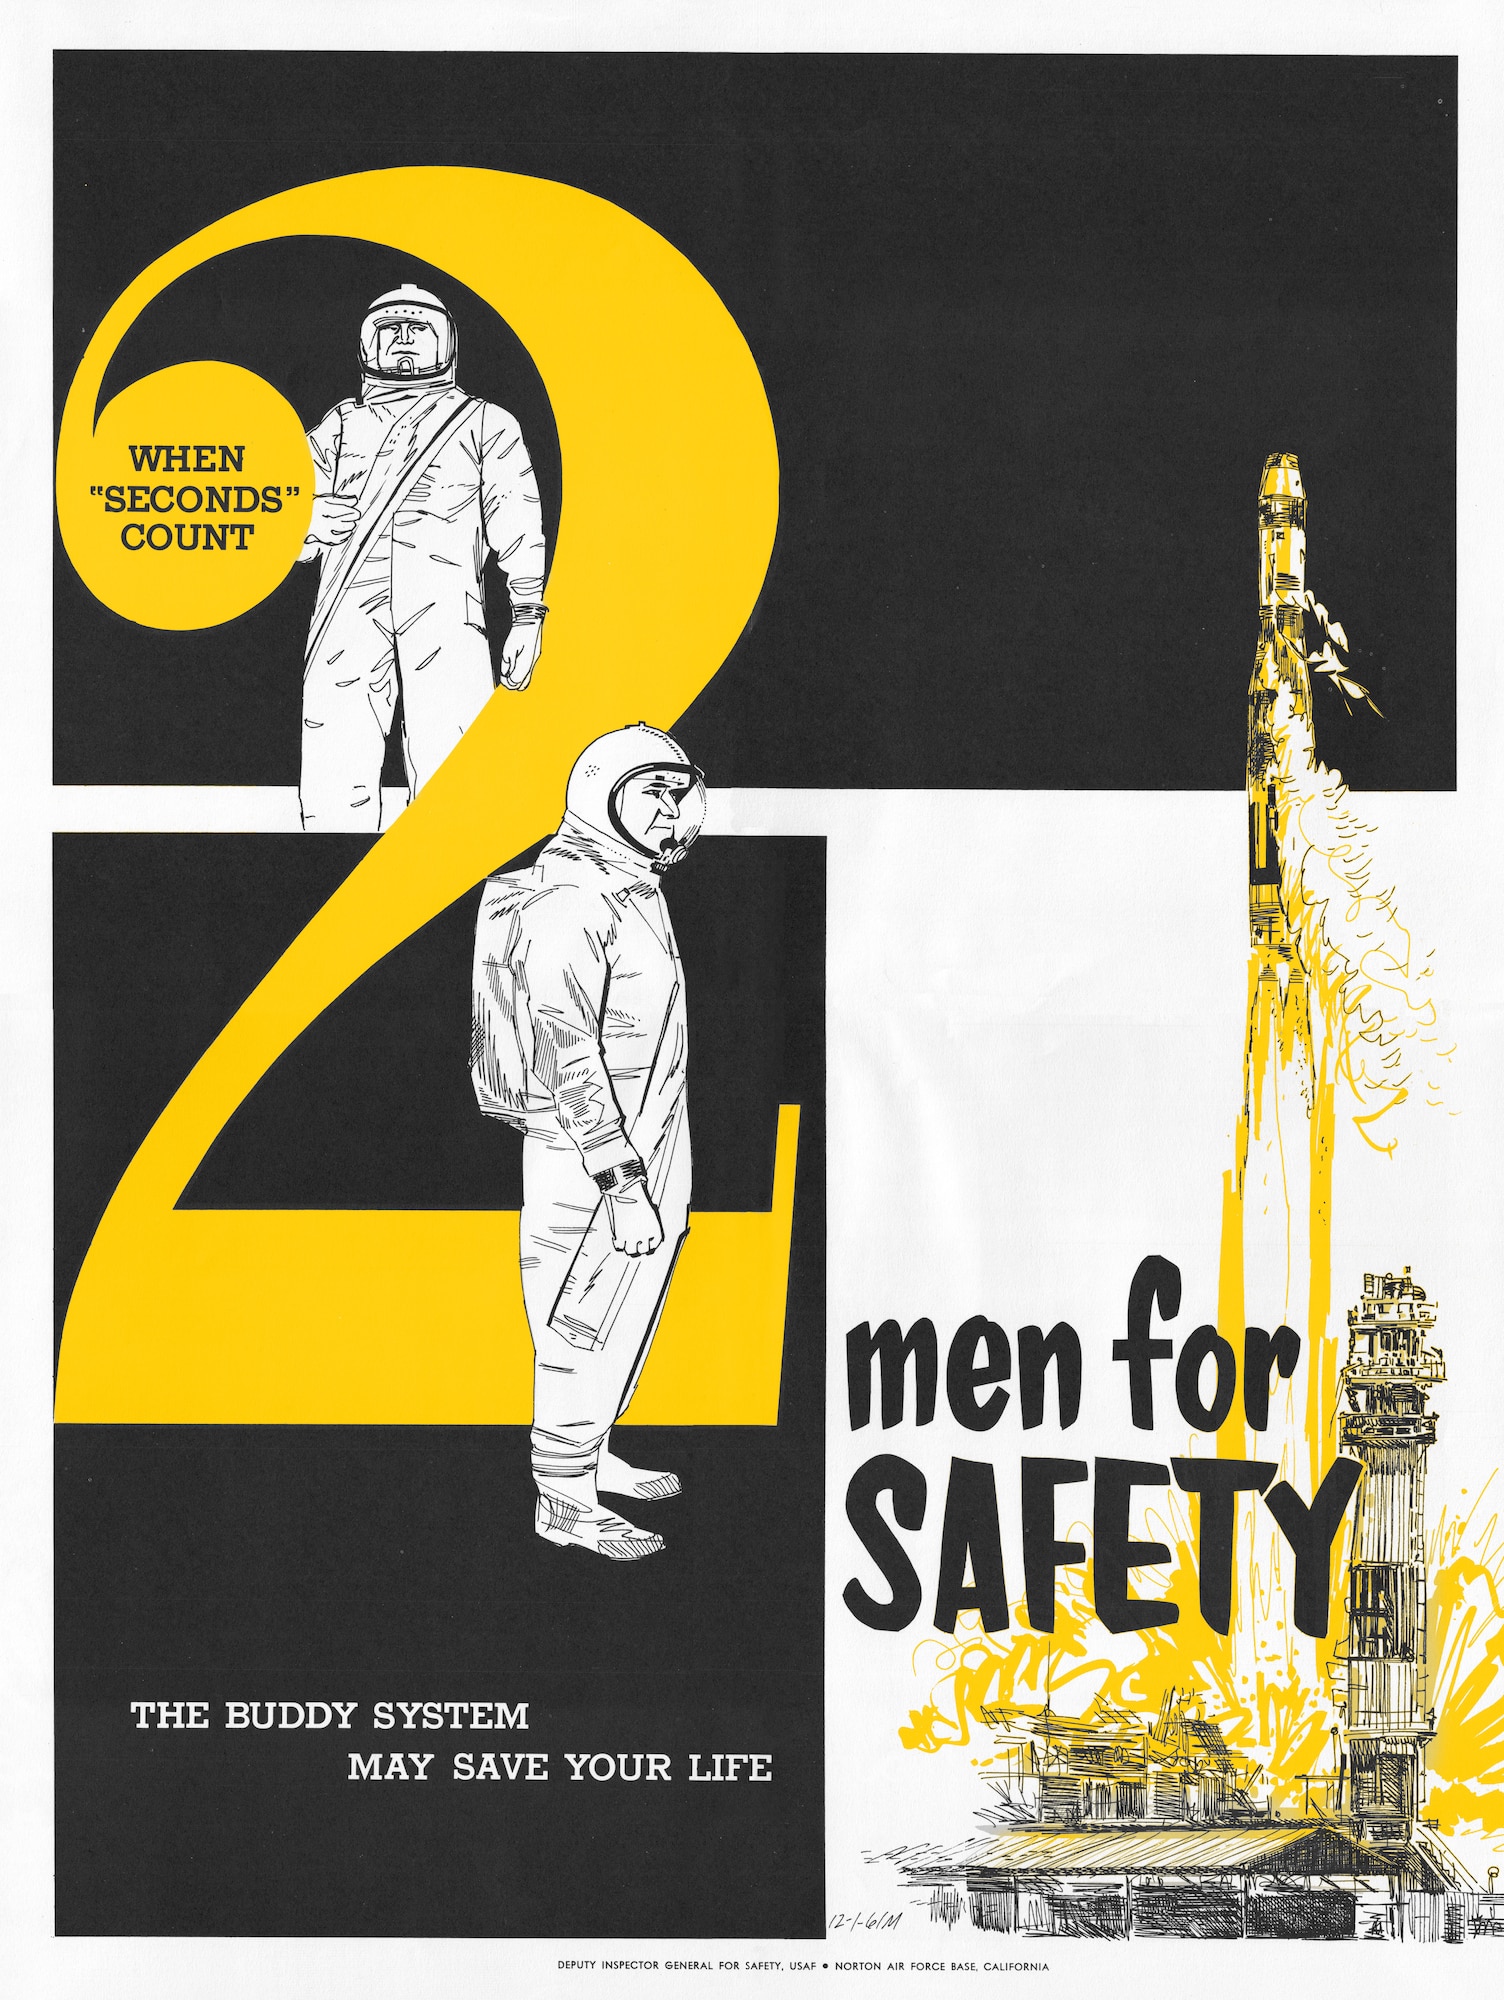 Vintage safety poster depicting the use of the buddy system may save your life from the
Directorate of Aerospace Safety, 1961 (Air Force Graphic)
